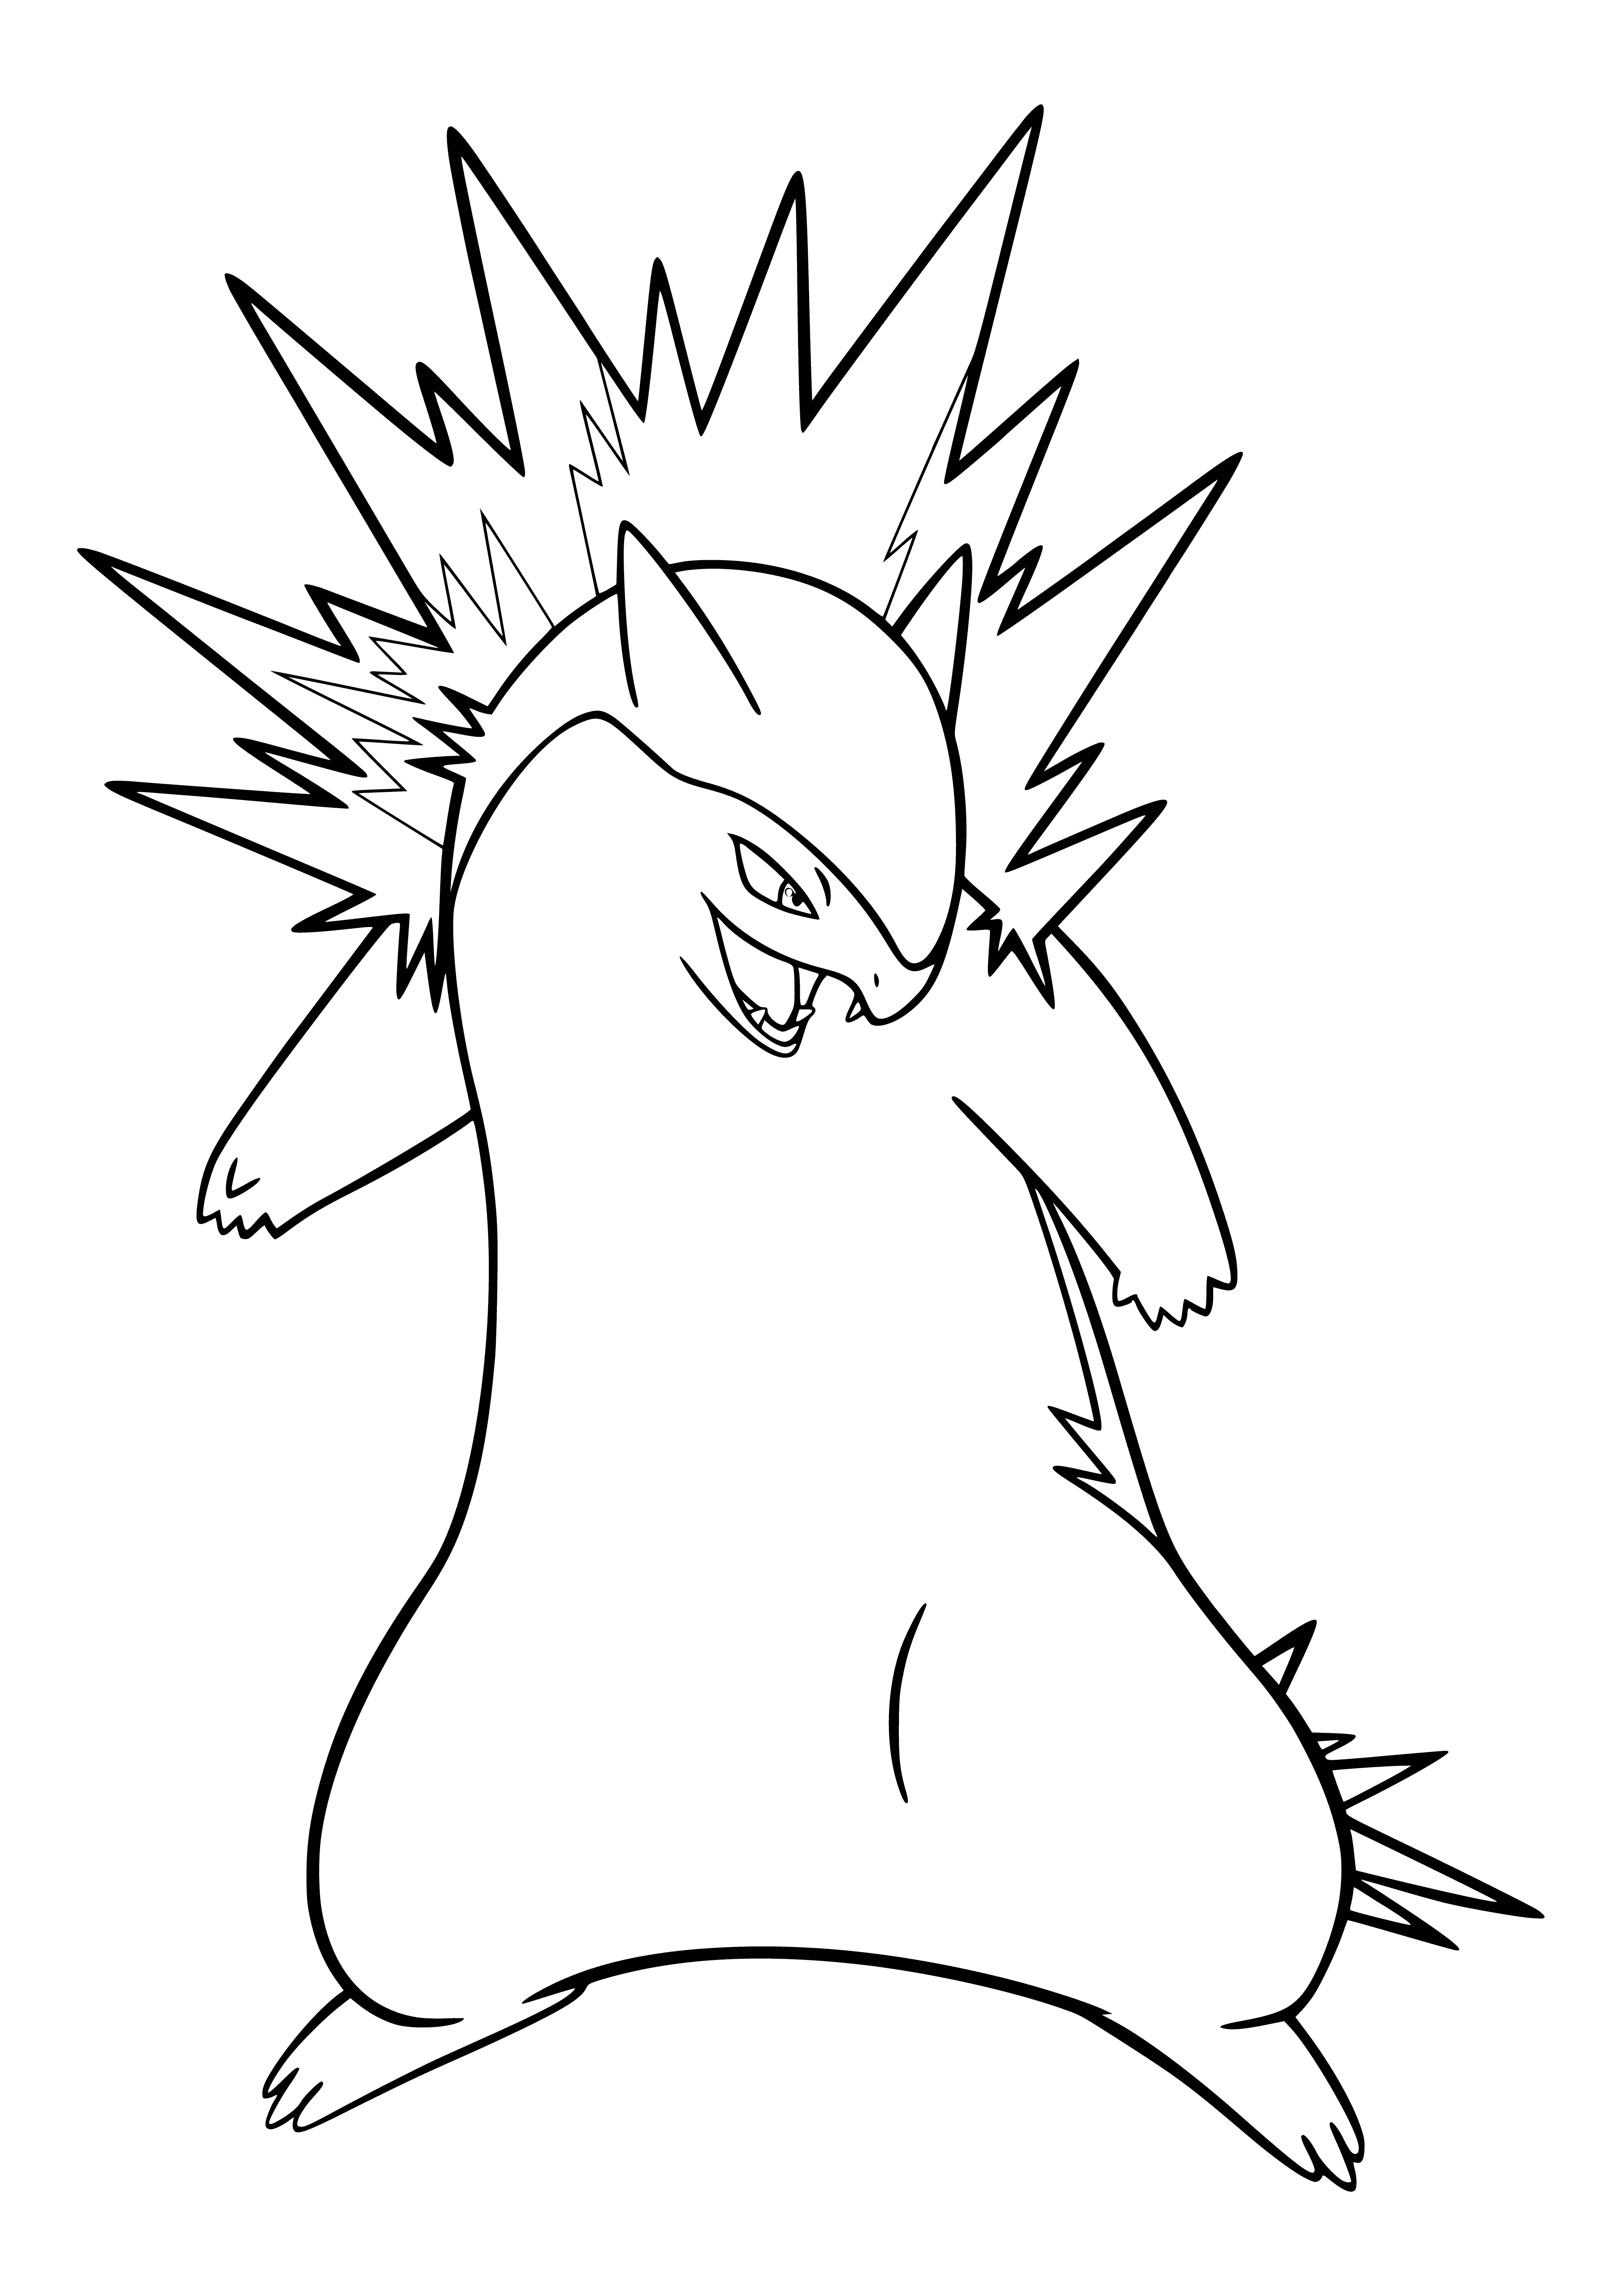 Pokemon Typhlosion coloring page